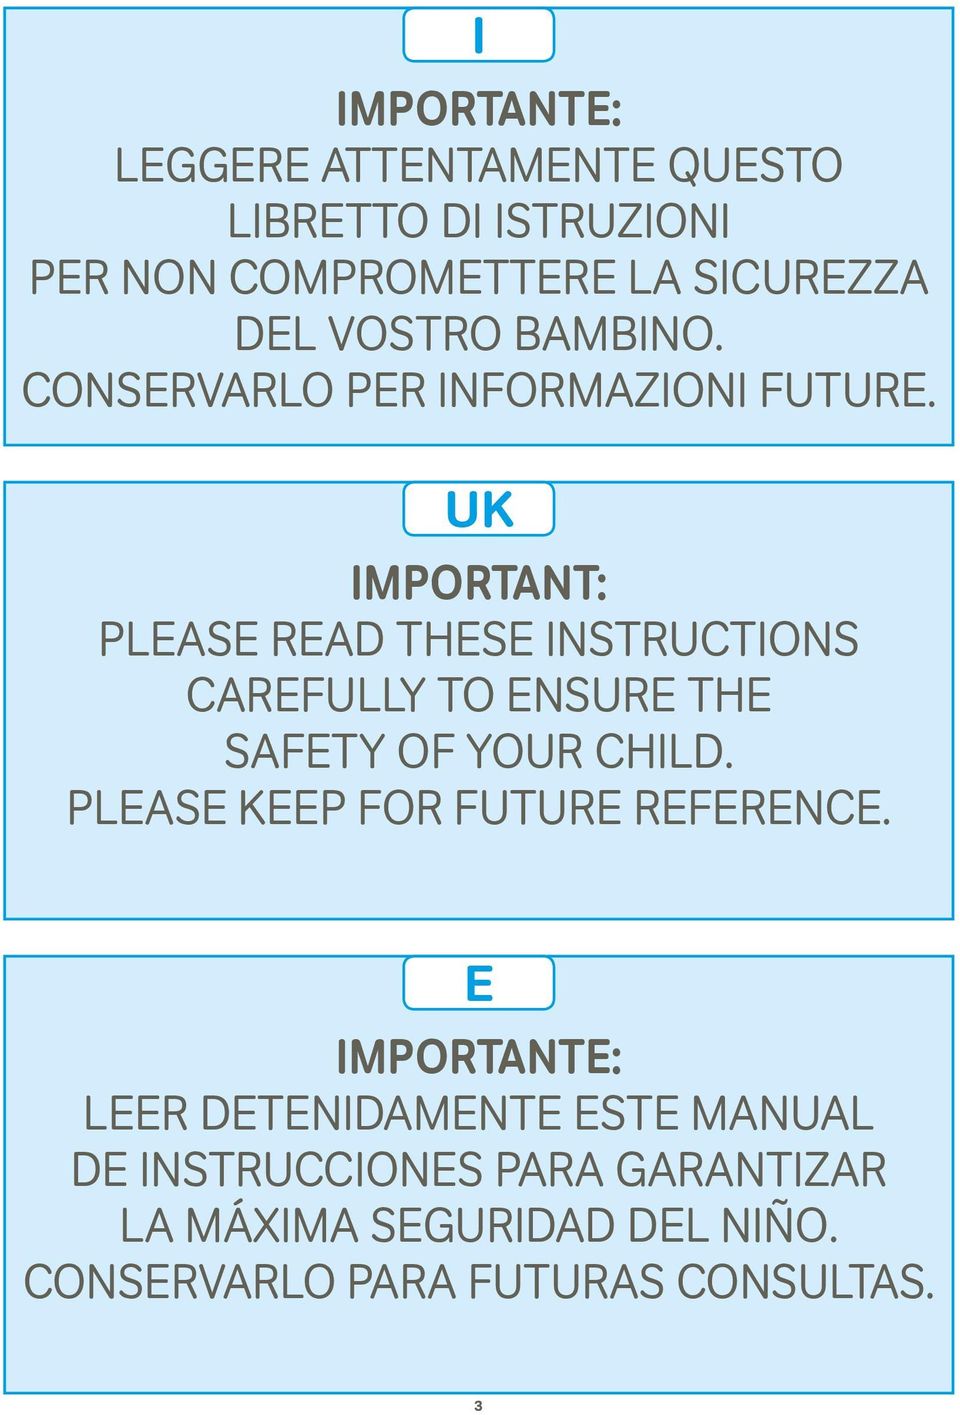 CAREFULLY TO ENSURE THE SAFETY OF YOUR CHILD PLEASE KEEP FOR FUTURE REFERENCE GR E IMPORTANTE: LEER